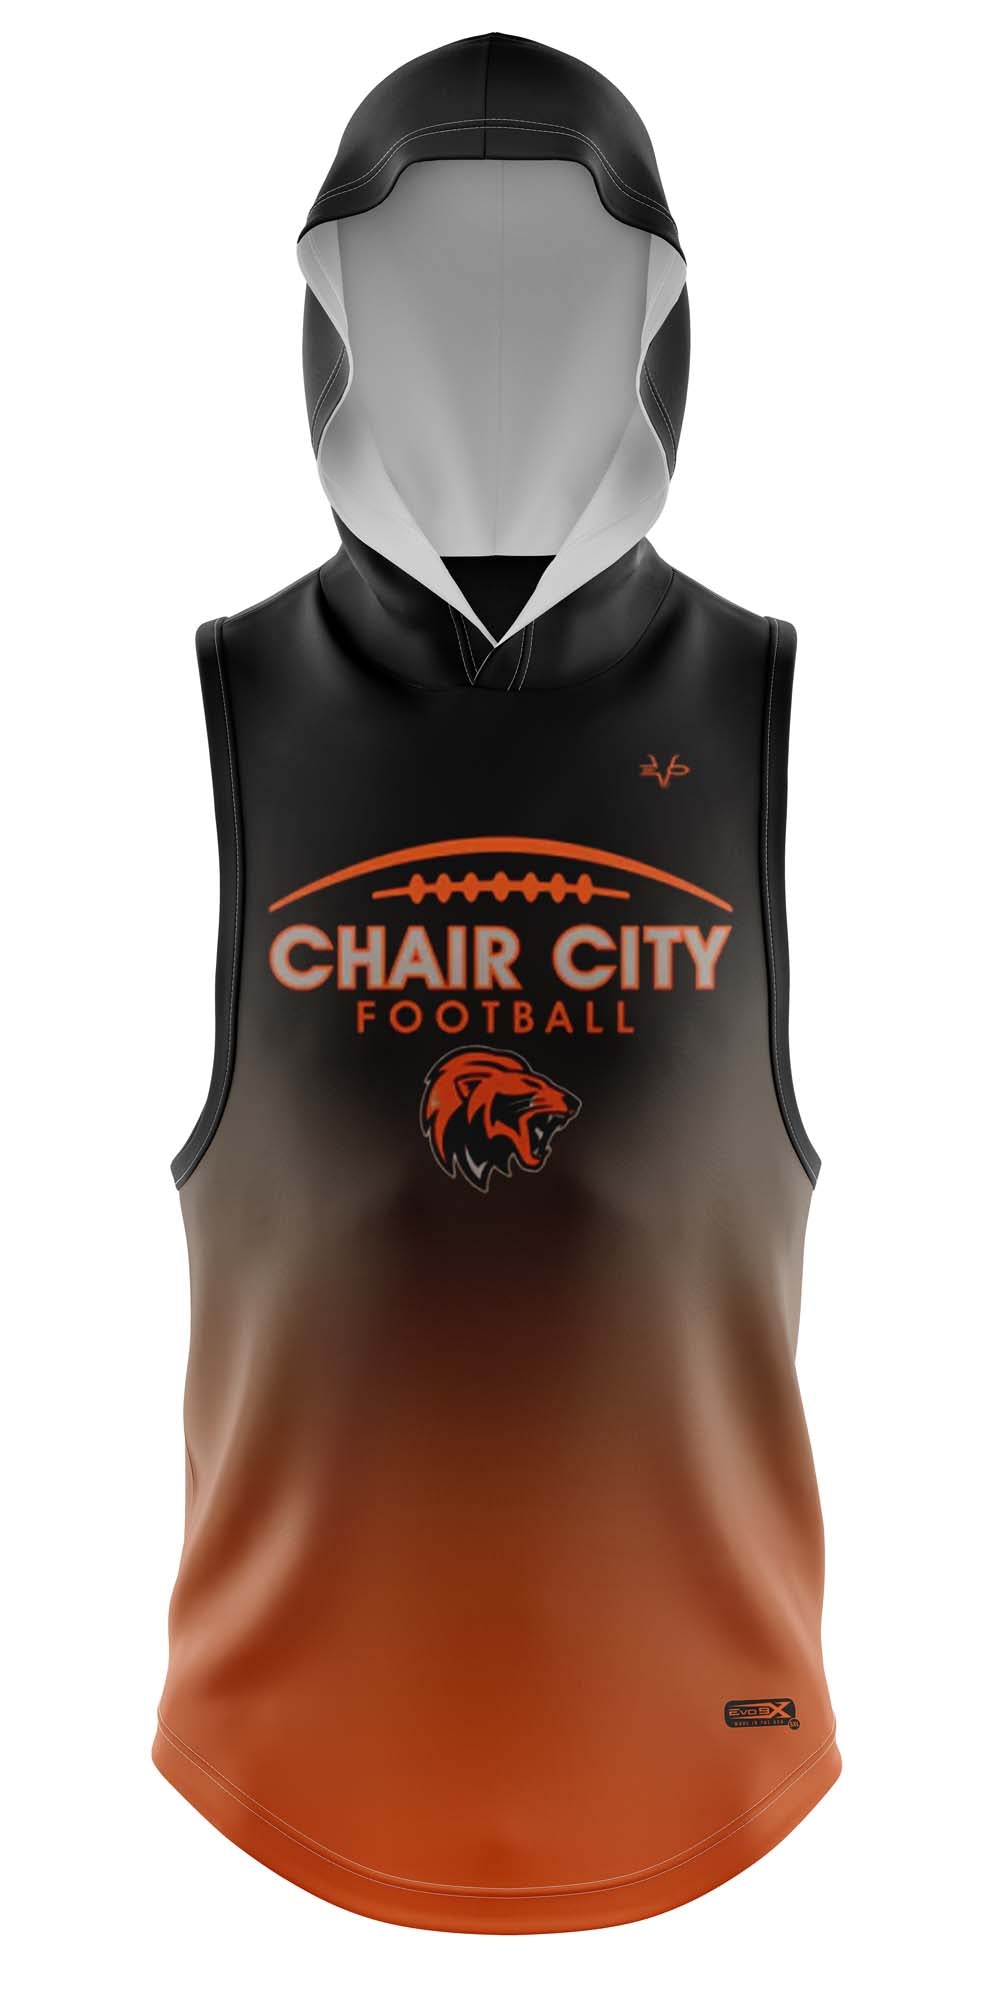 CHAIR CITY FOOTBALL Sublimated Sleeveless Compression Hoodie Black